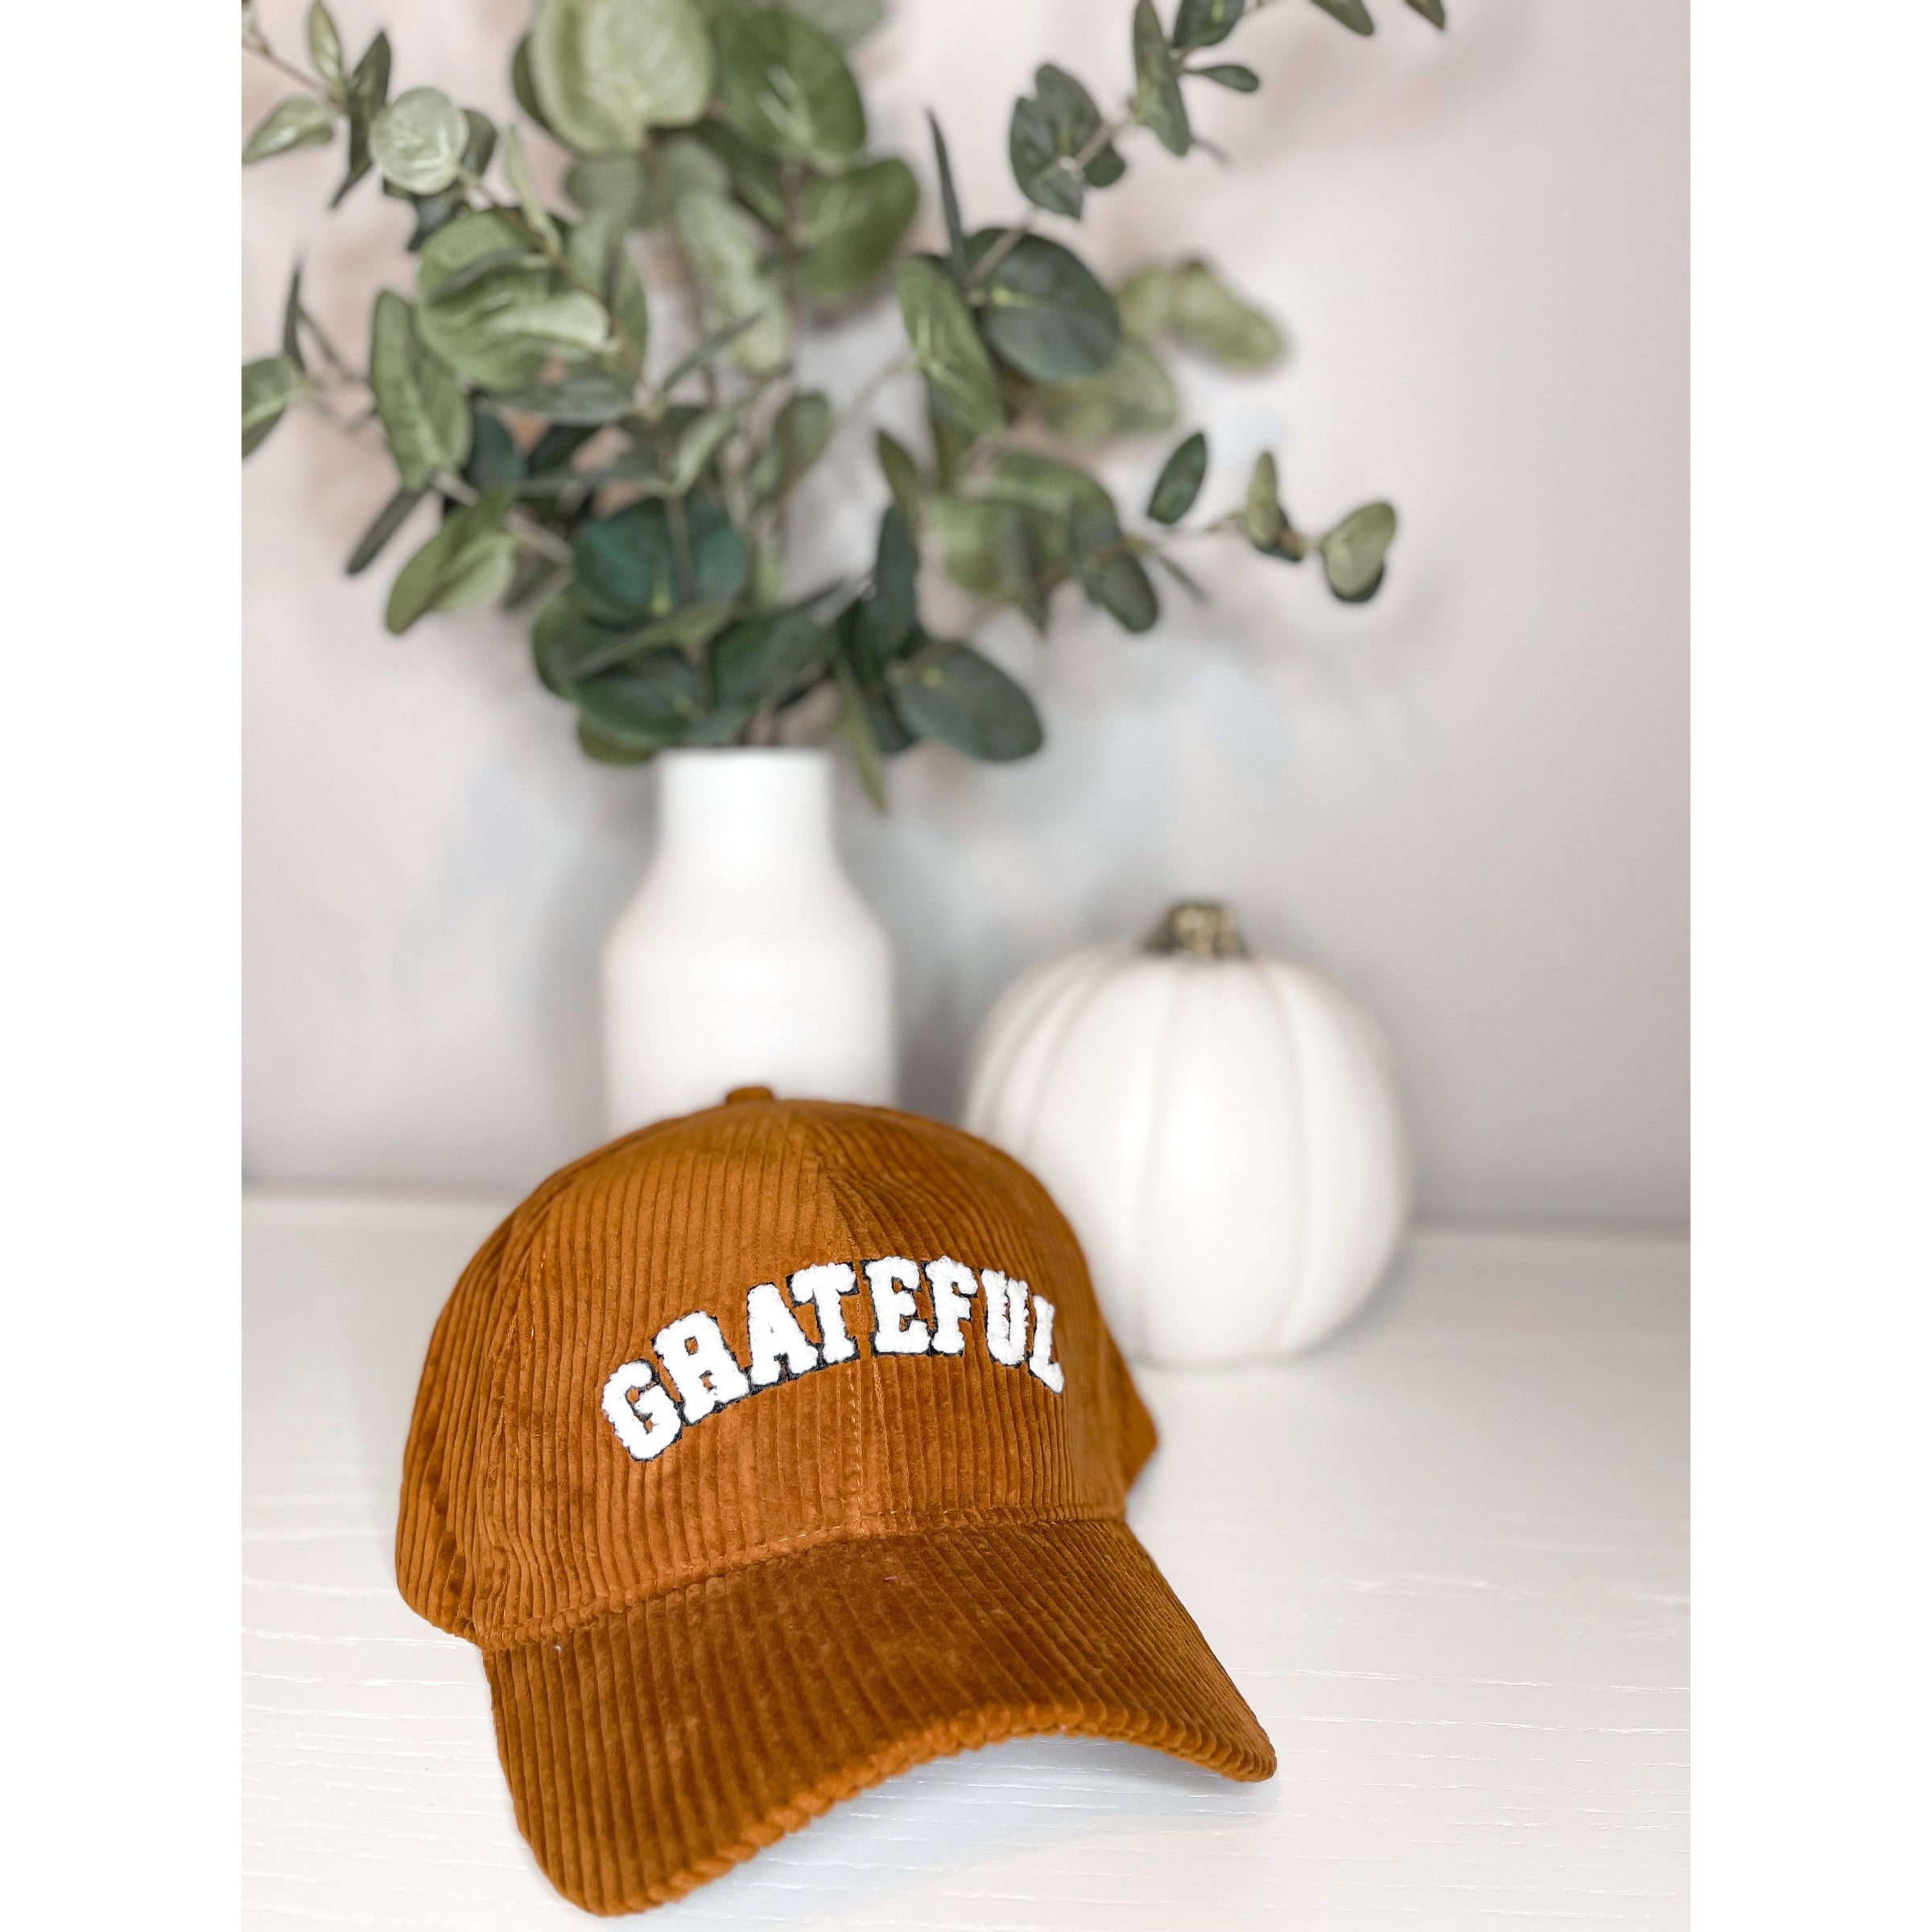 Grateful Dad Hat - The Hive by Chris Jesselle